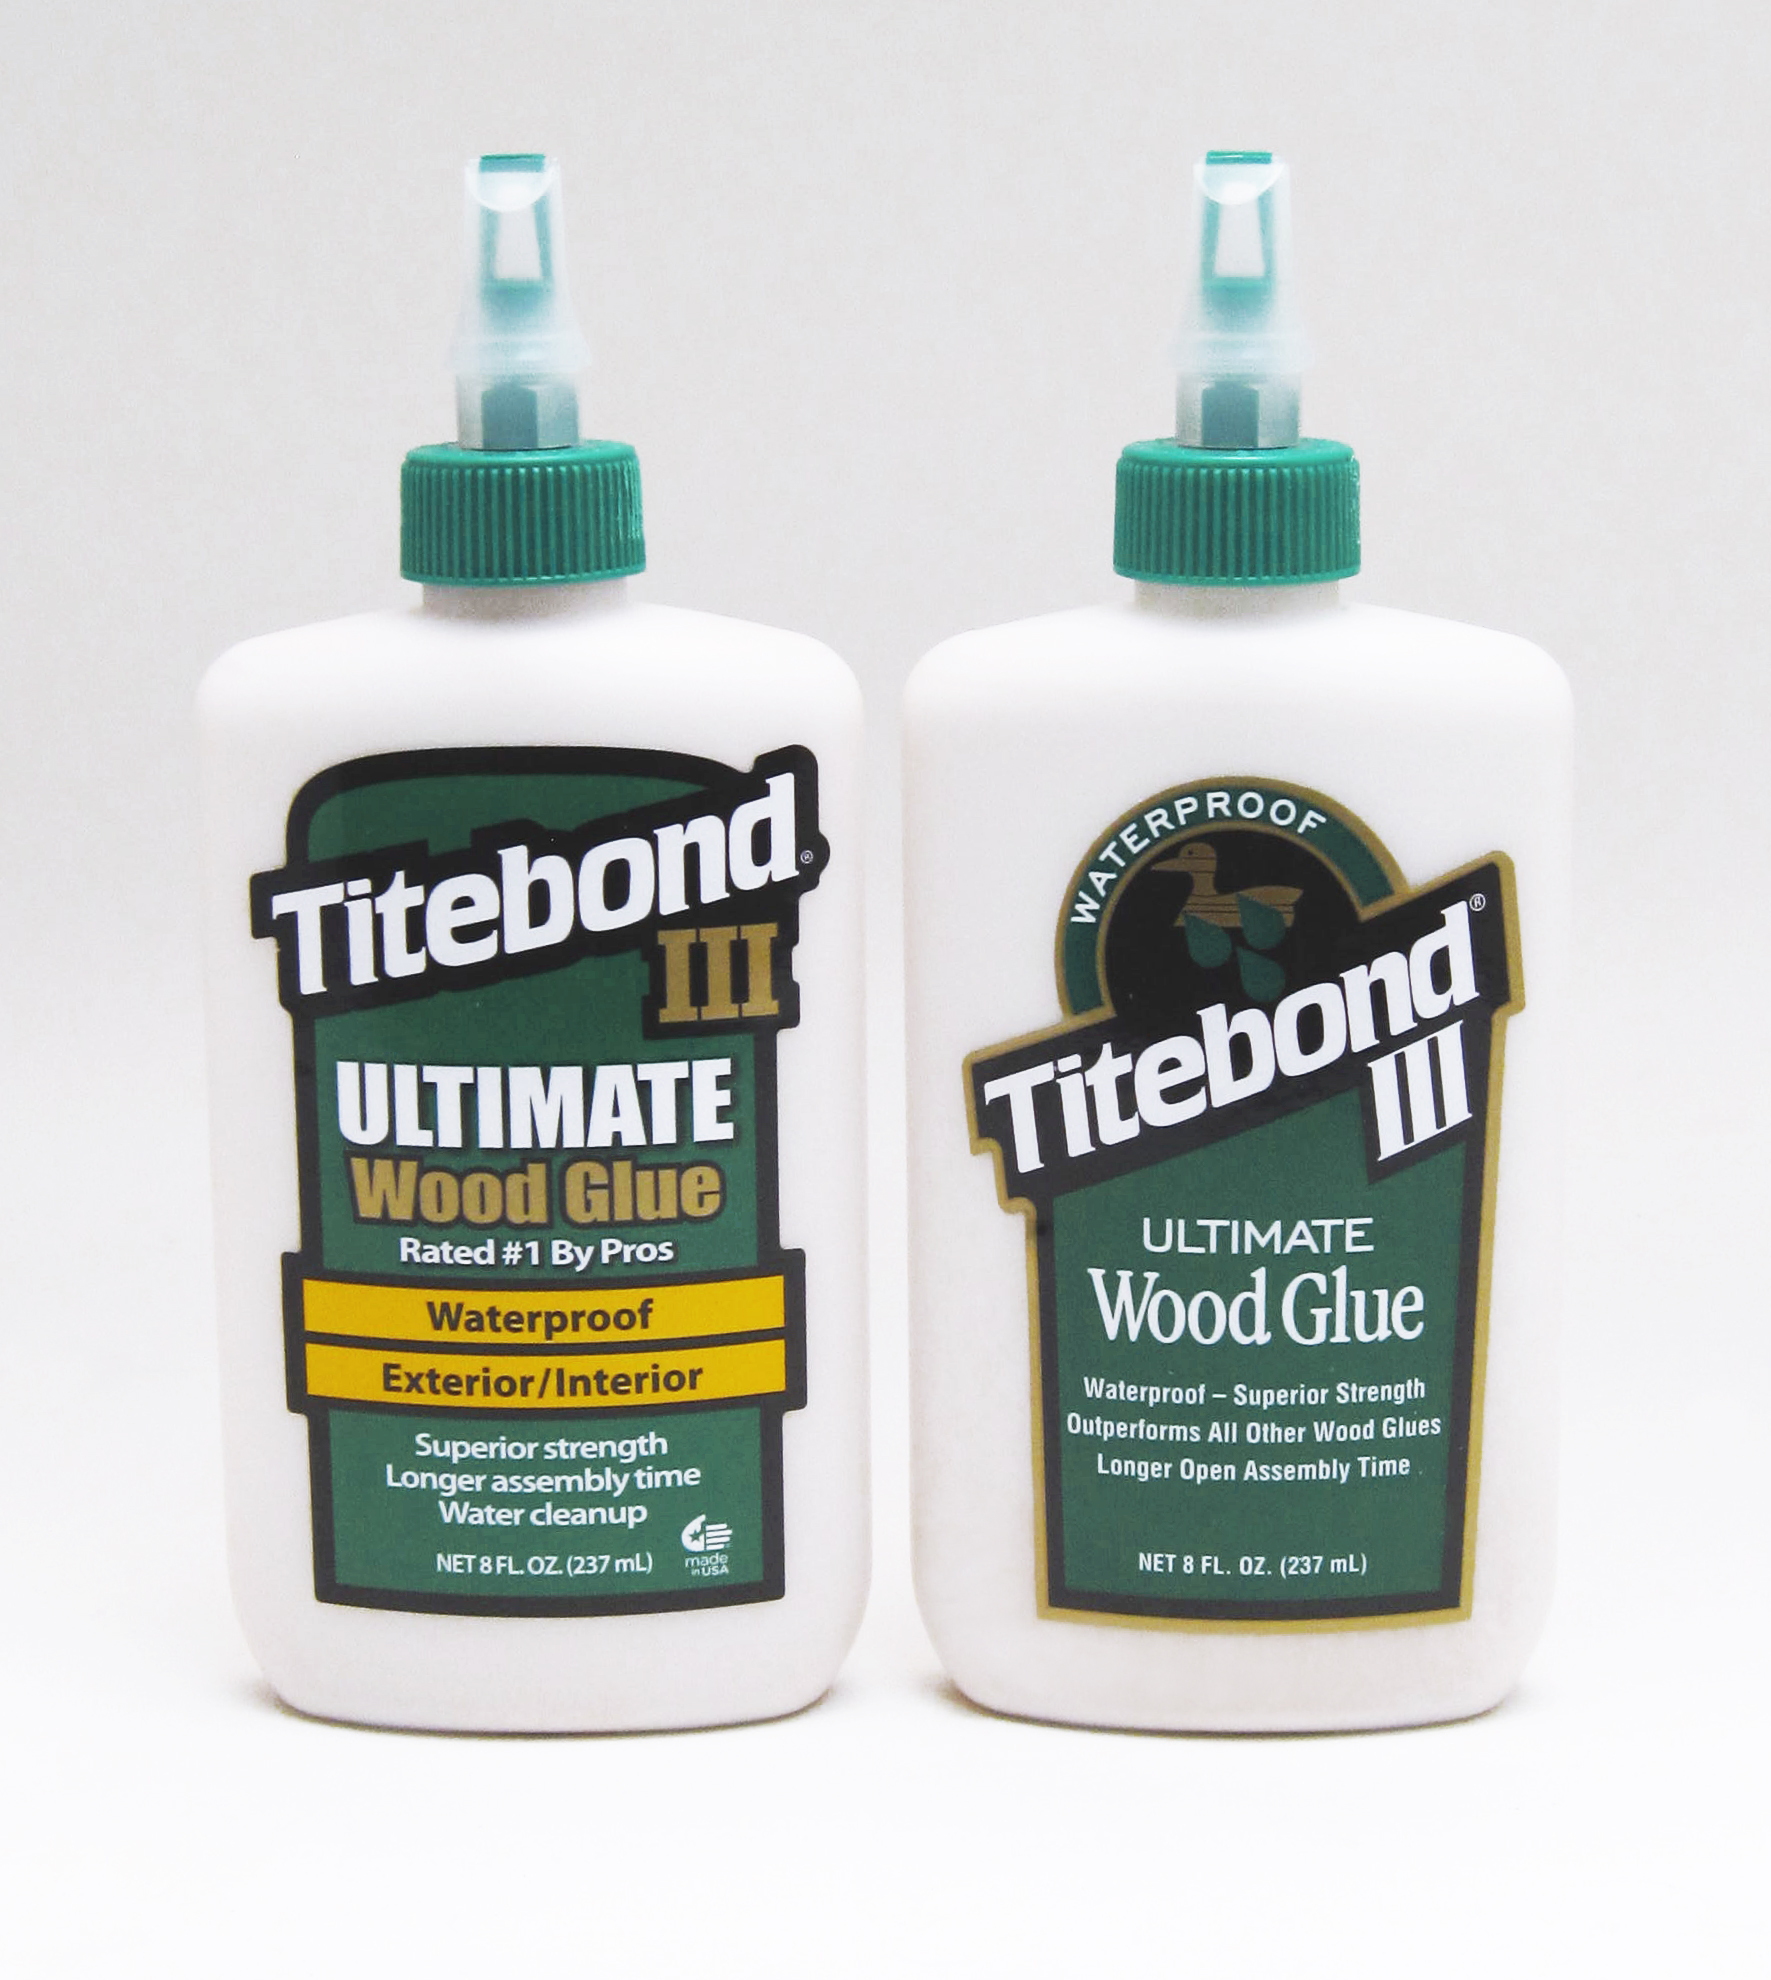 A side-by-side comparison of the new Titebond label (left) to the existing label.